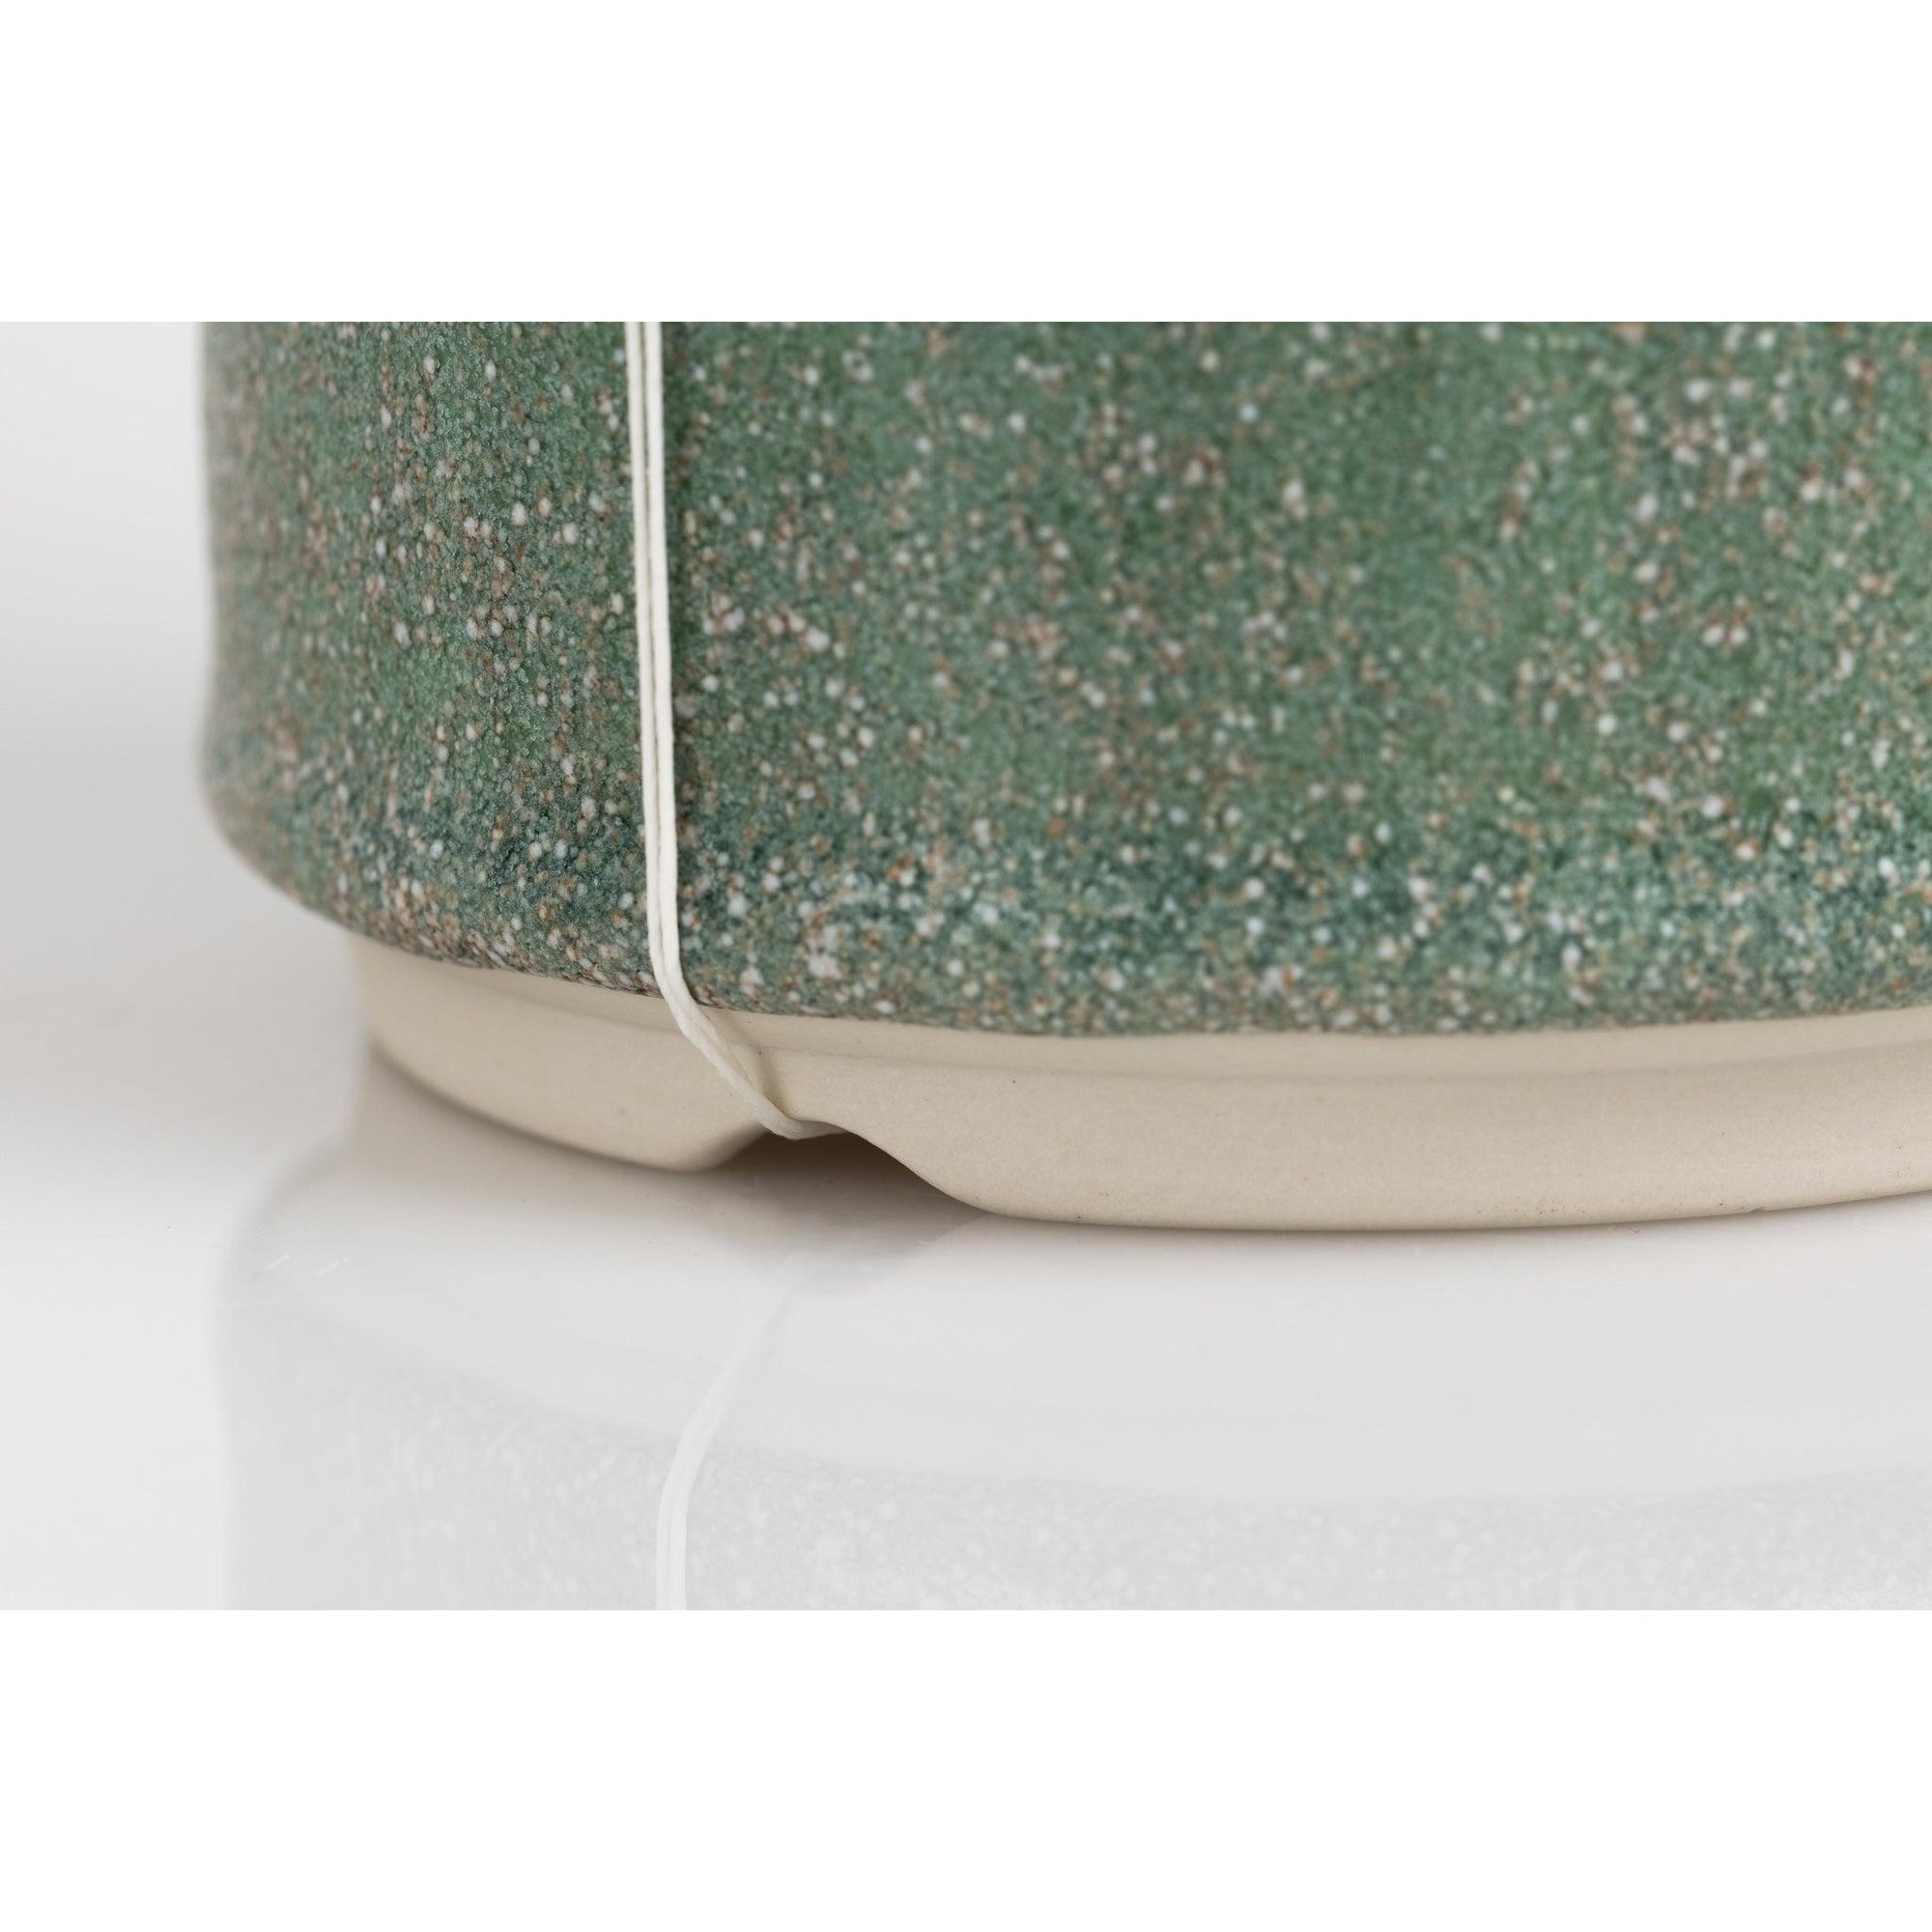 KSS1 Stoneware Bound Container by Kate Schuricht, available at Padstow Gallery, Cornwall